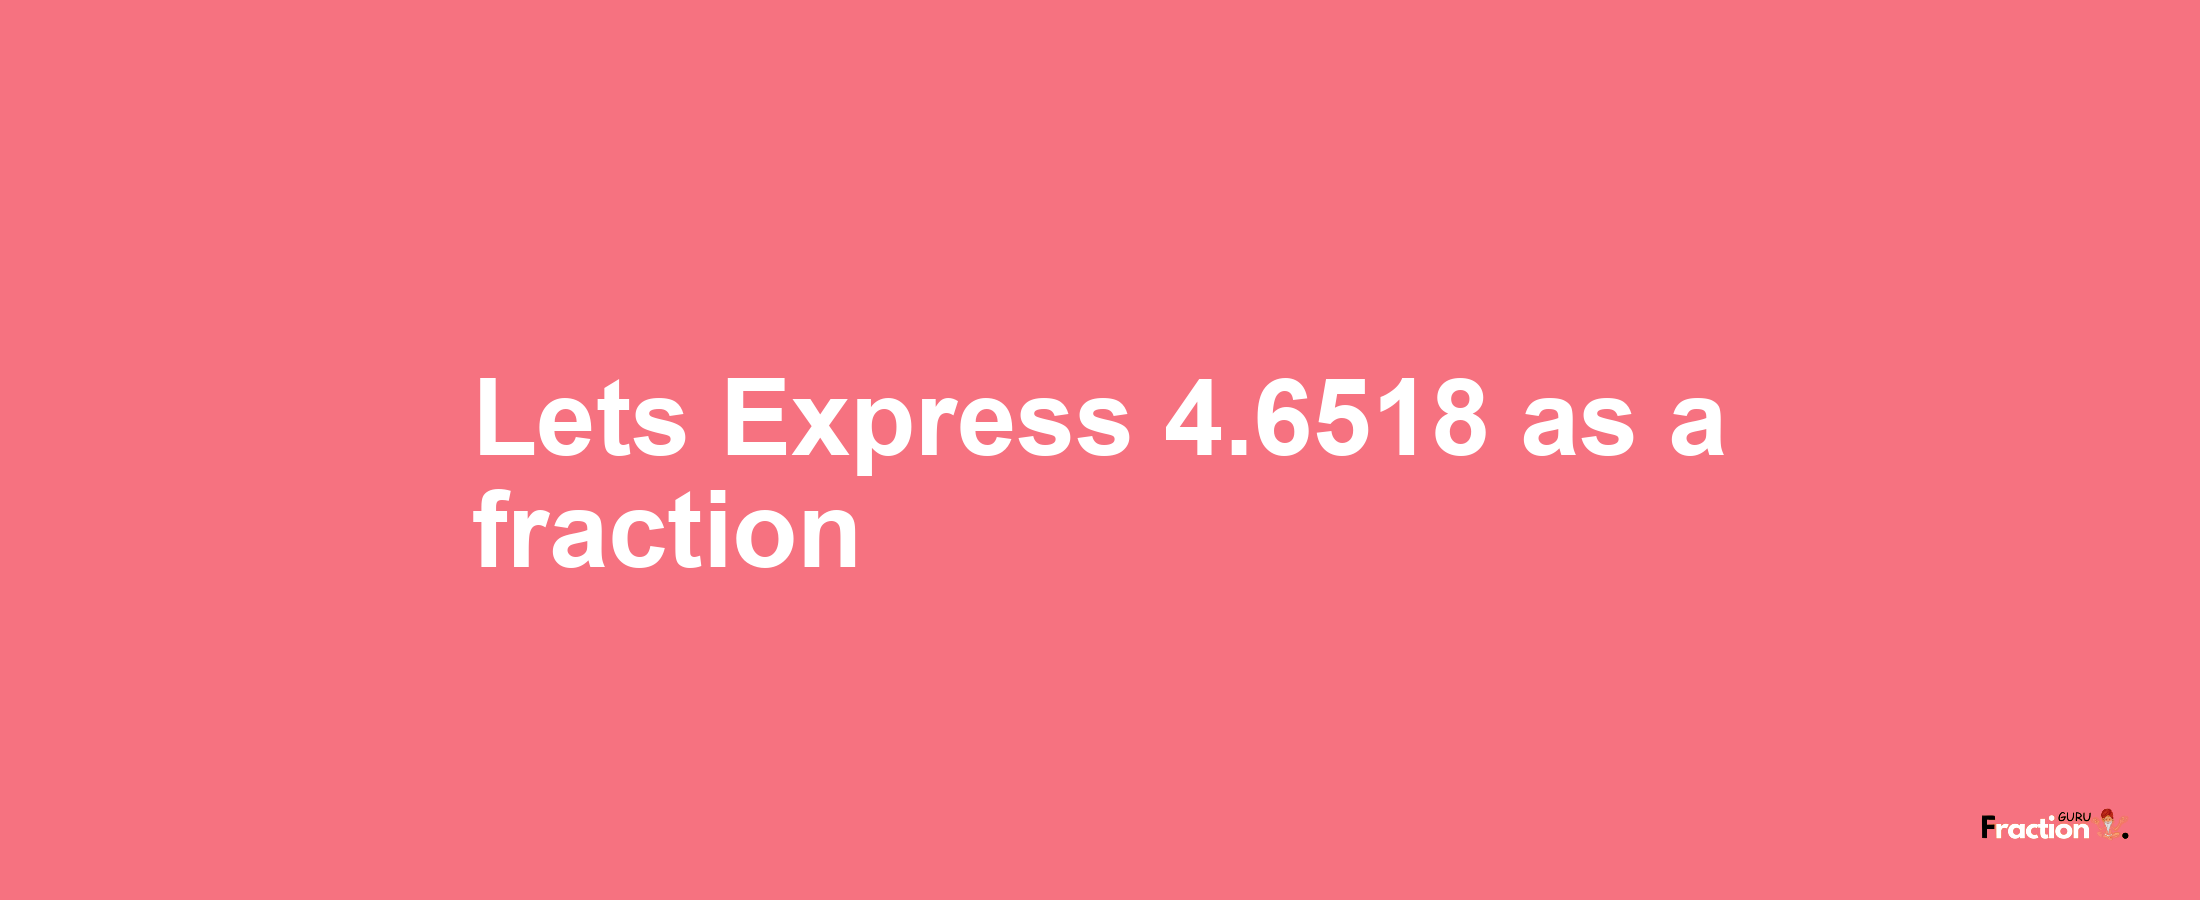 Lets Express 4.6518 as afraction